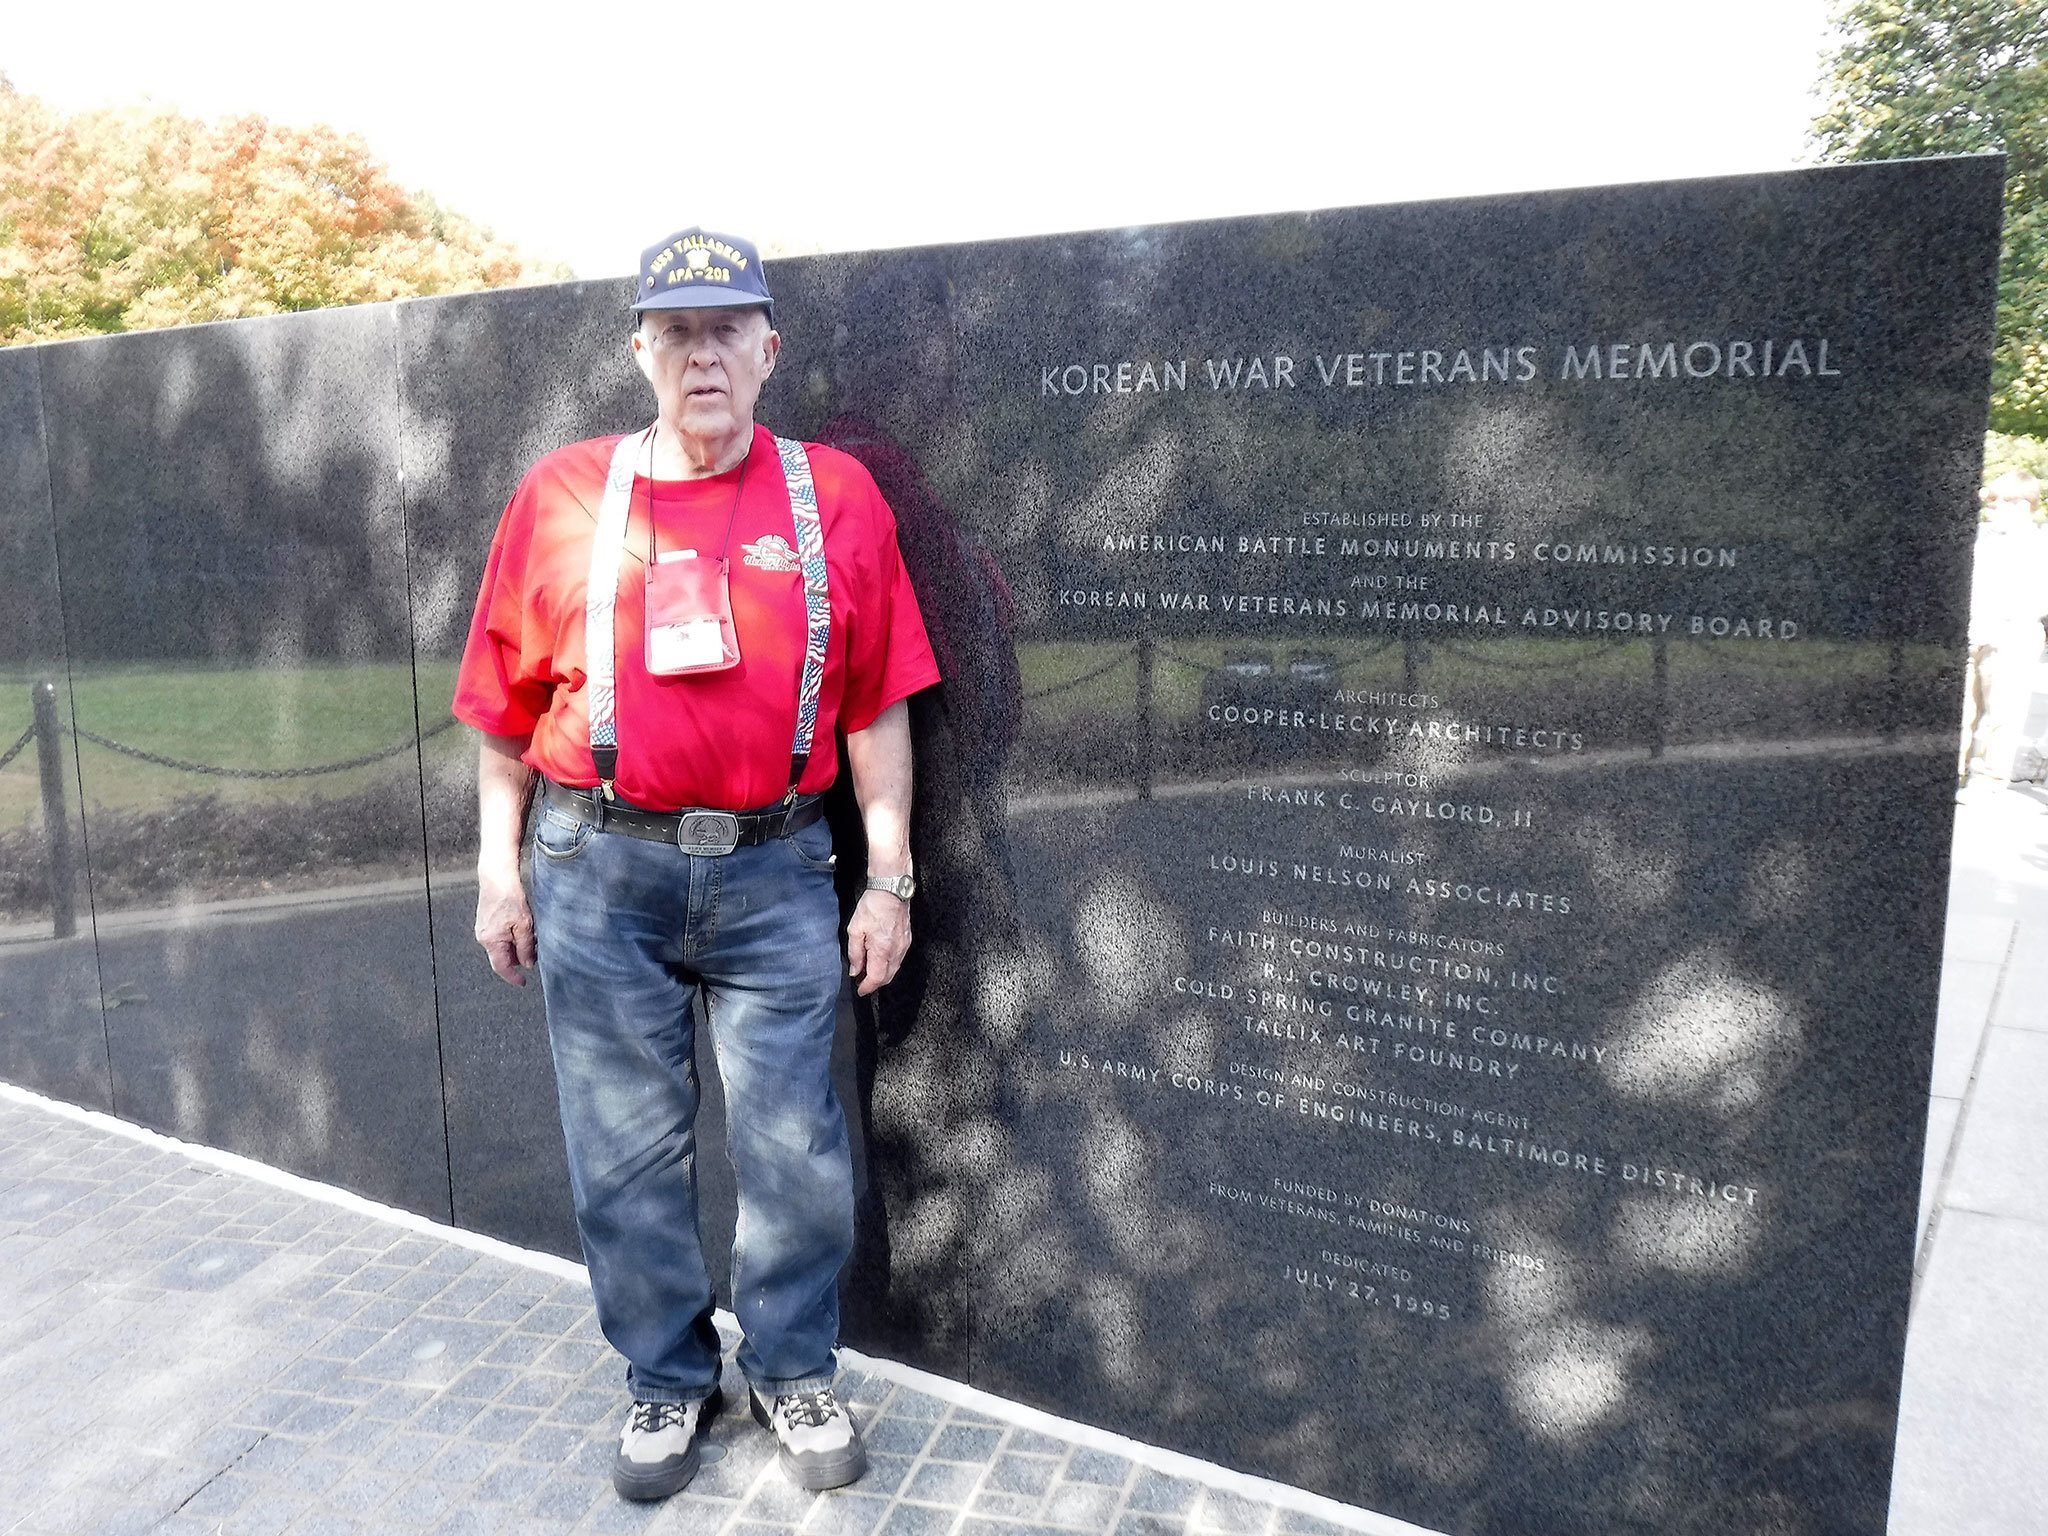 John Sutherland Jr., of Kent, stands in front of the Korean War Memorial in Washington, D.C. Sutherland, a Korean War veteran, traveled to the nation’s capital with Puget Sound Honor Flight. COURTESY PHOTO